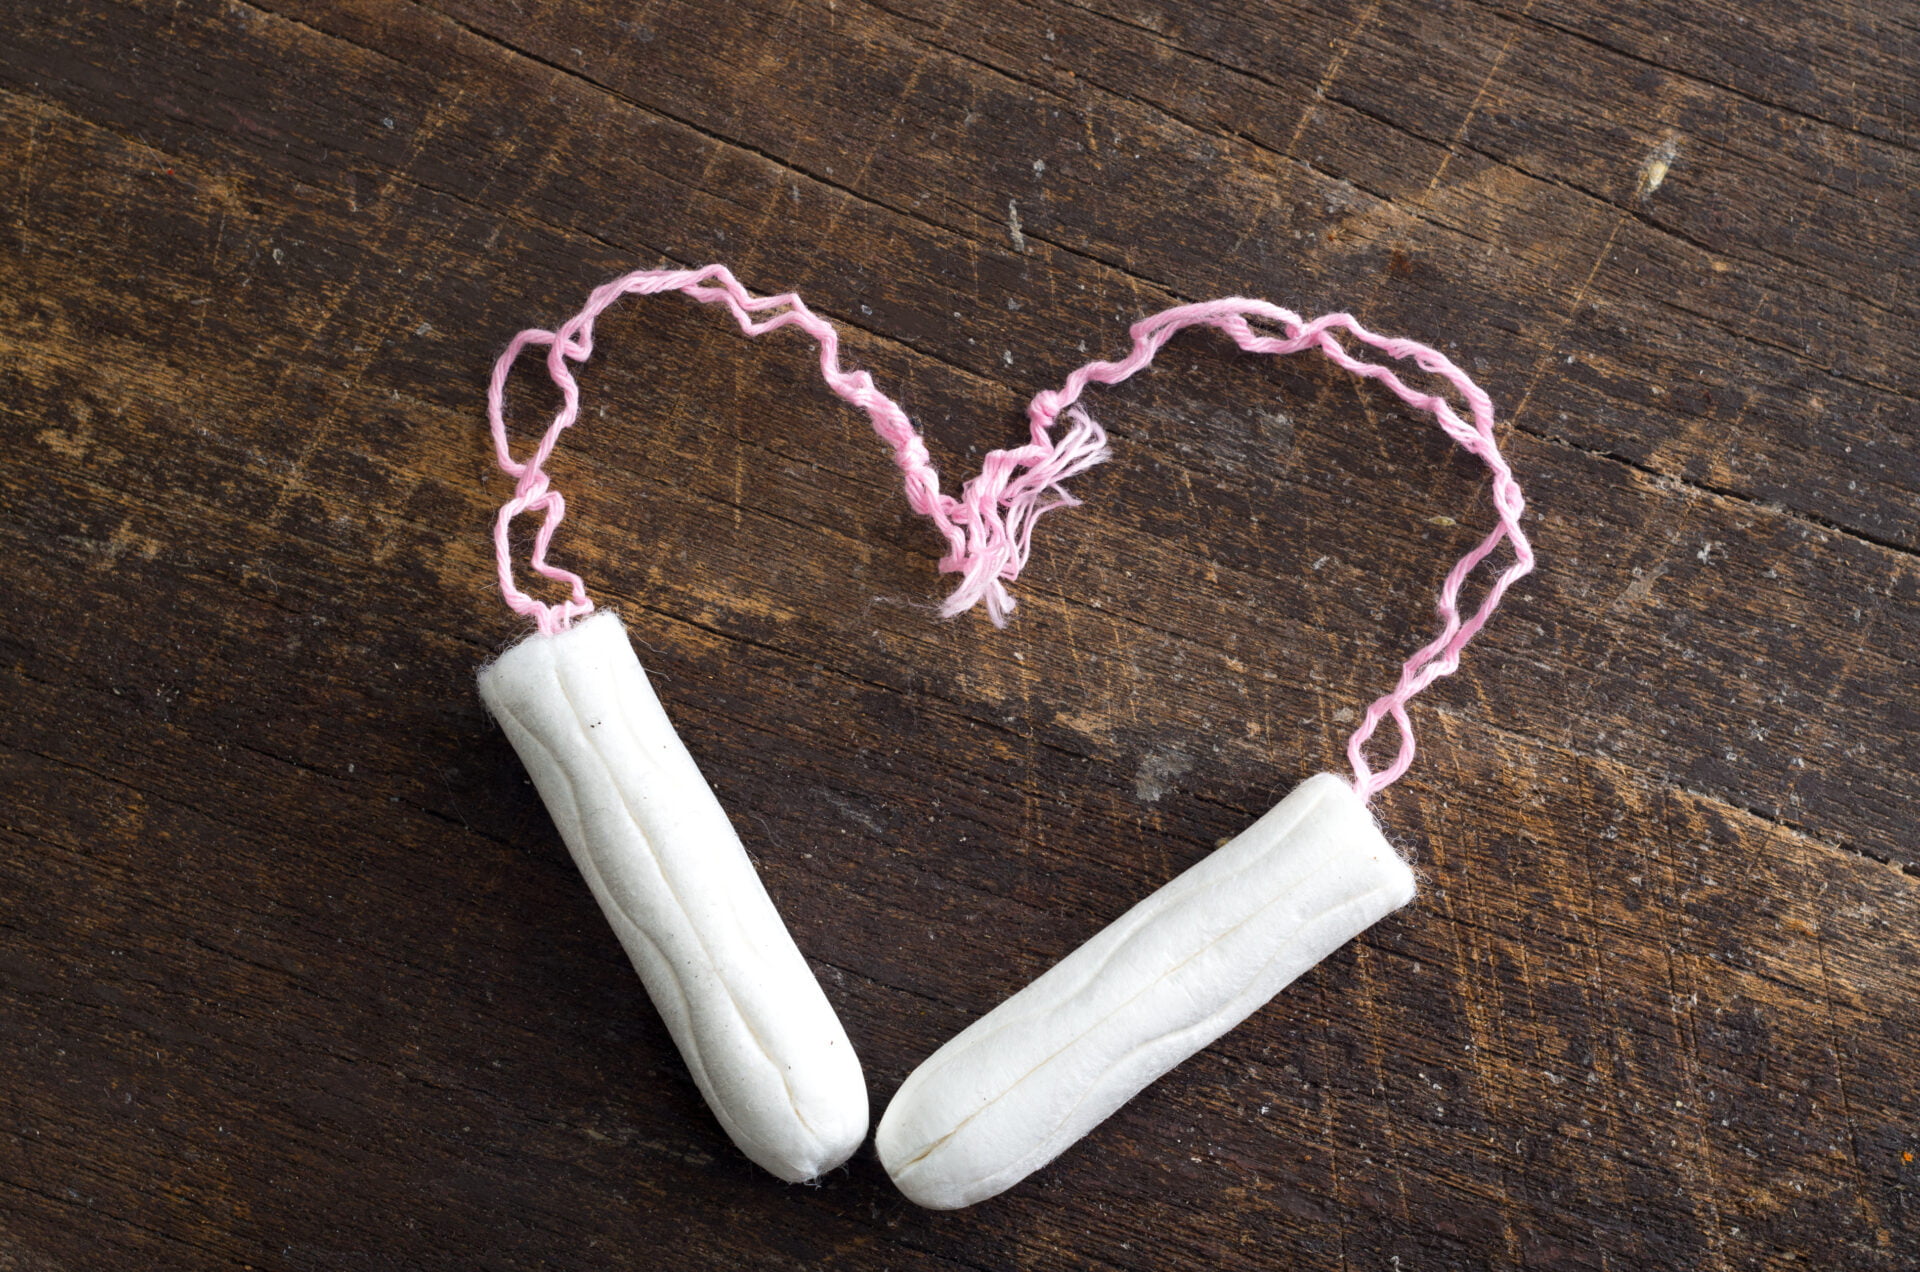 Two clean white tampons shaped in to a heart lying on wooden surface.